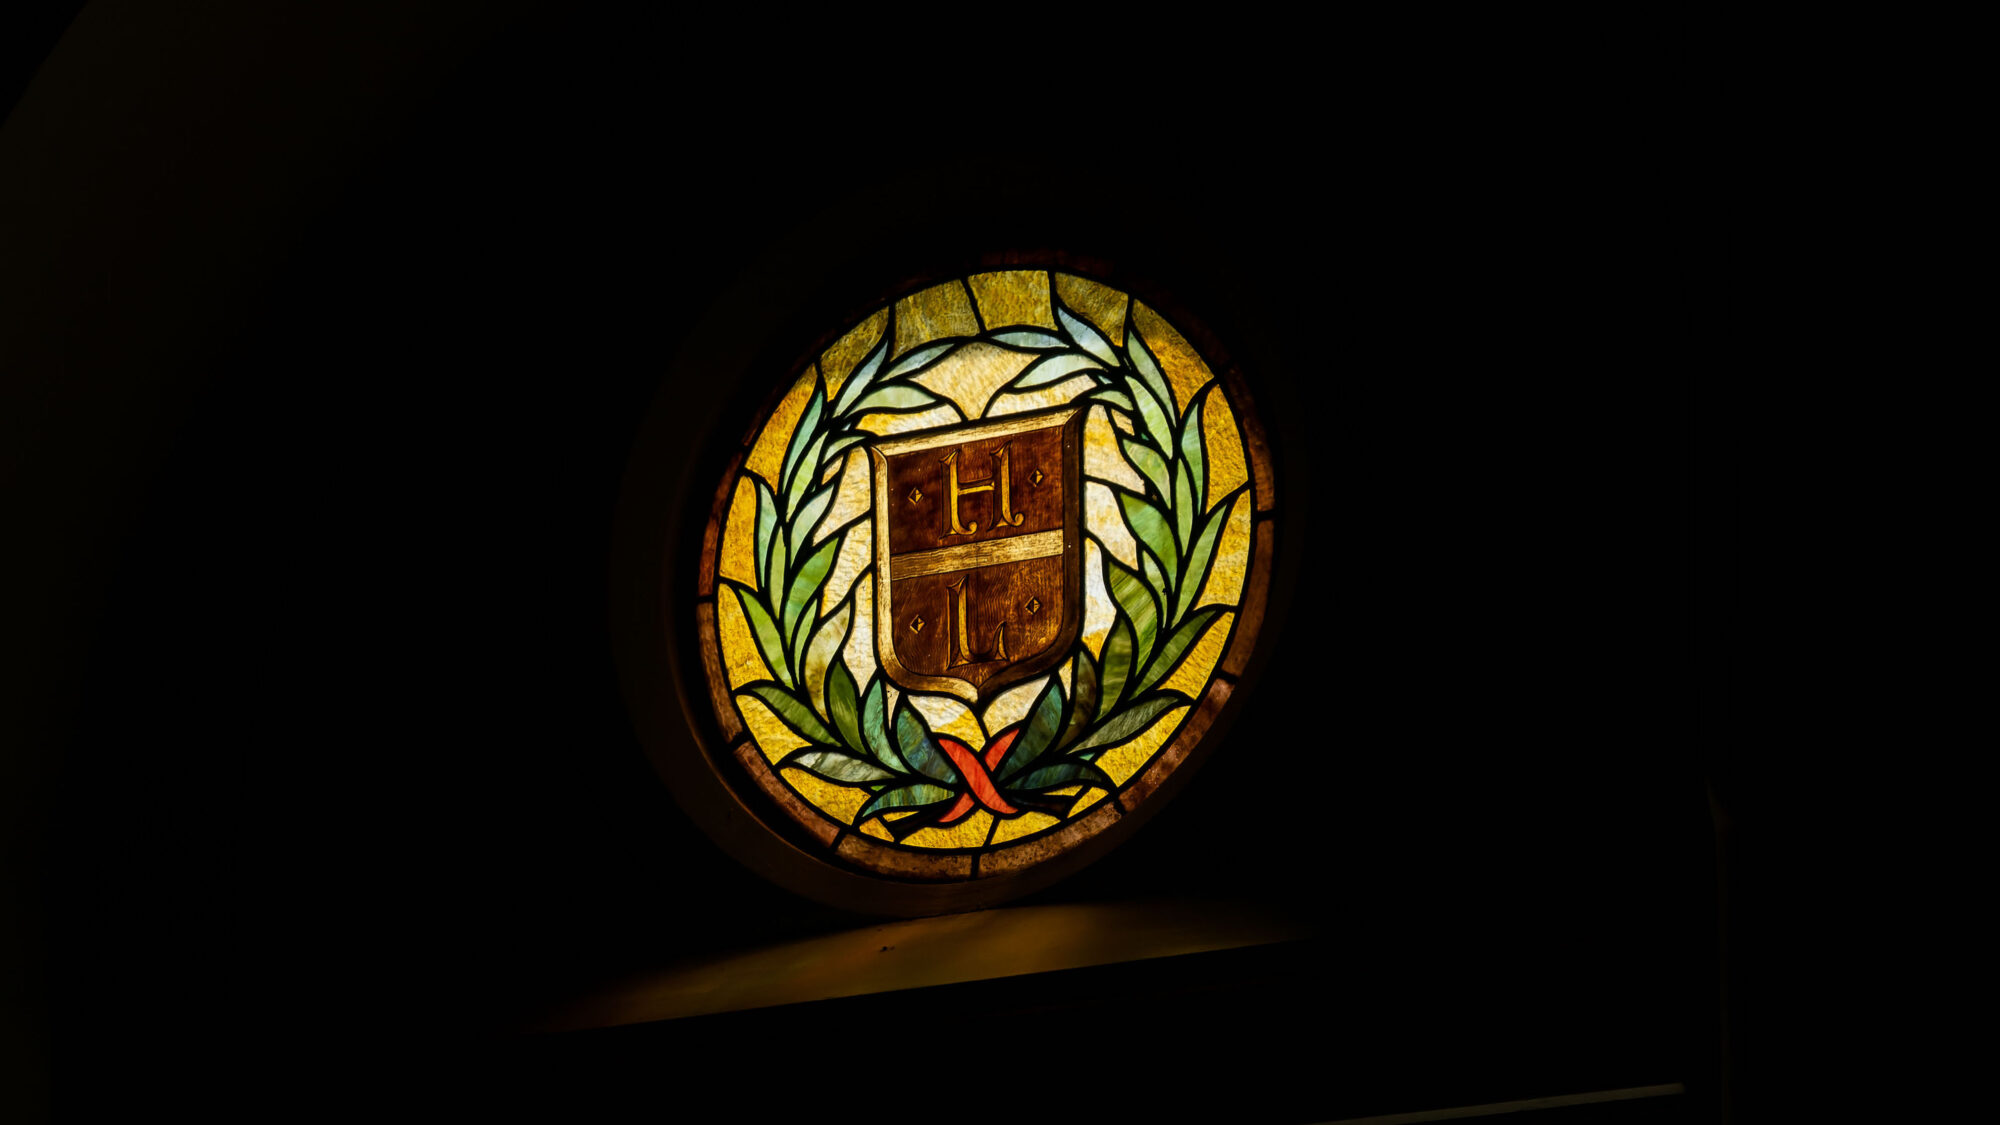 A stained glass window is colorful against a dark background